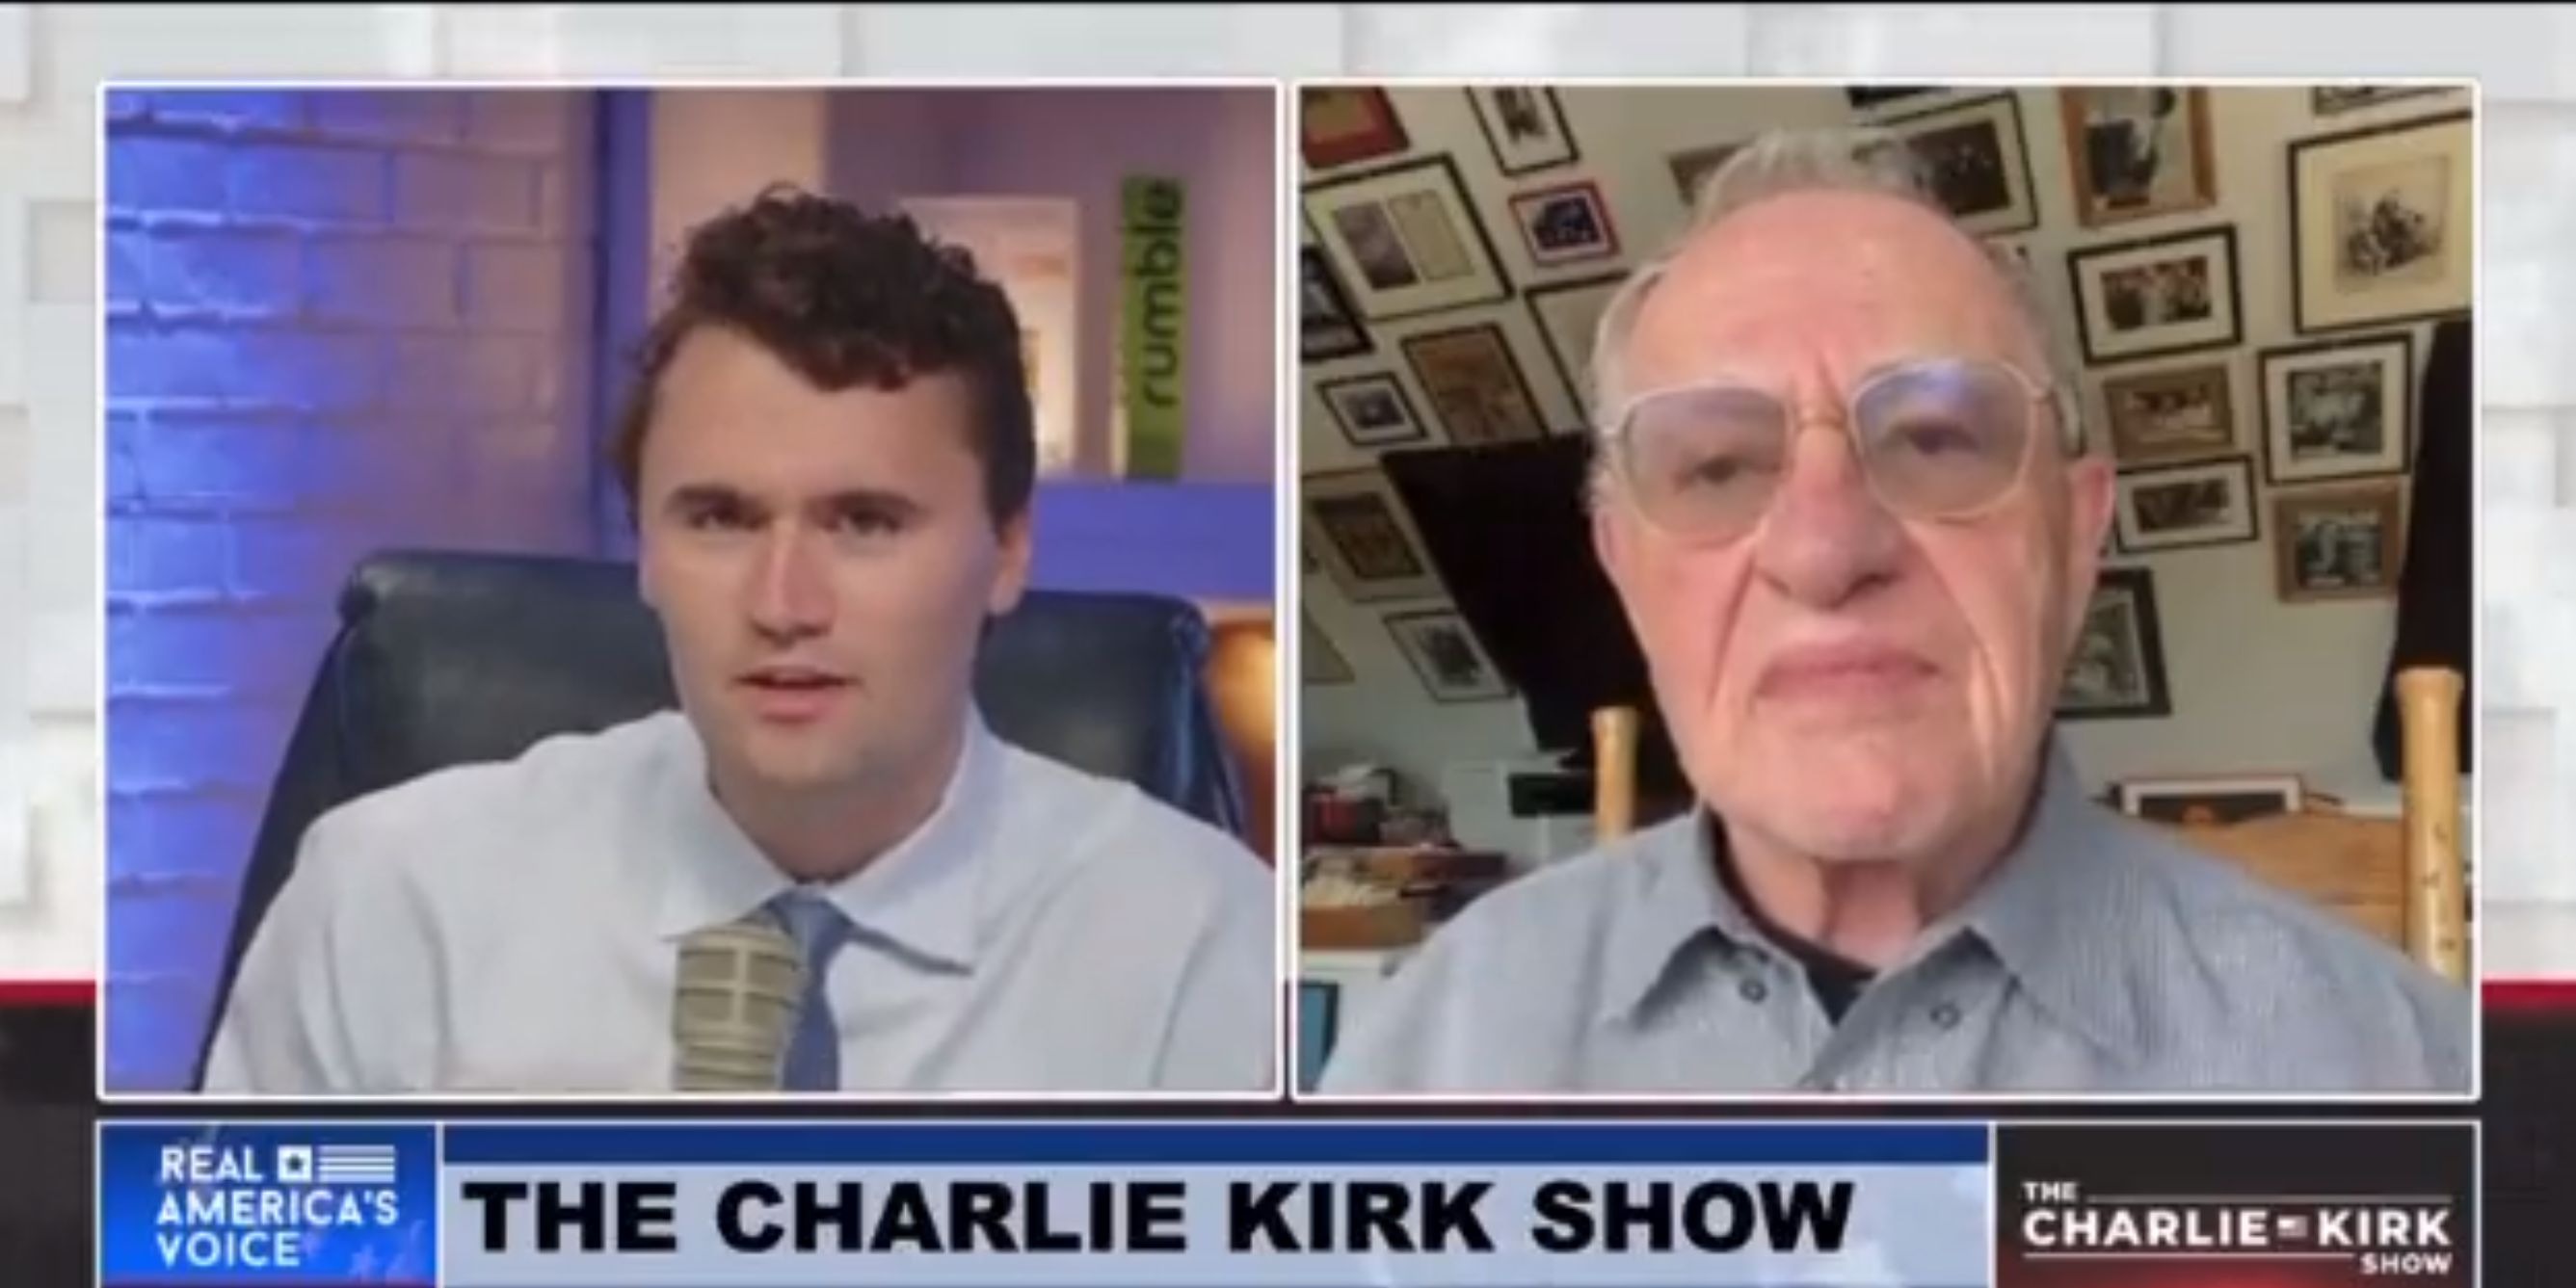 ‘We’ve seen so many lies’: Alan Dershowitz tells Charlie Kirk Trump indictment will not hold up in court of law